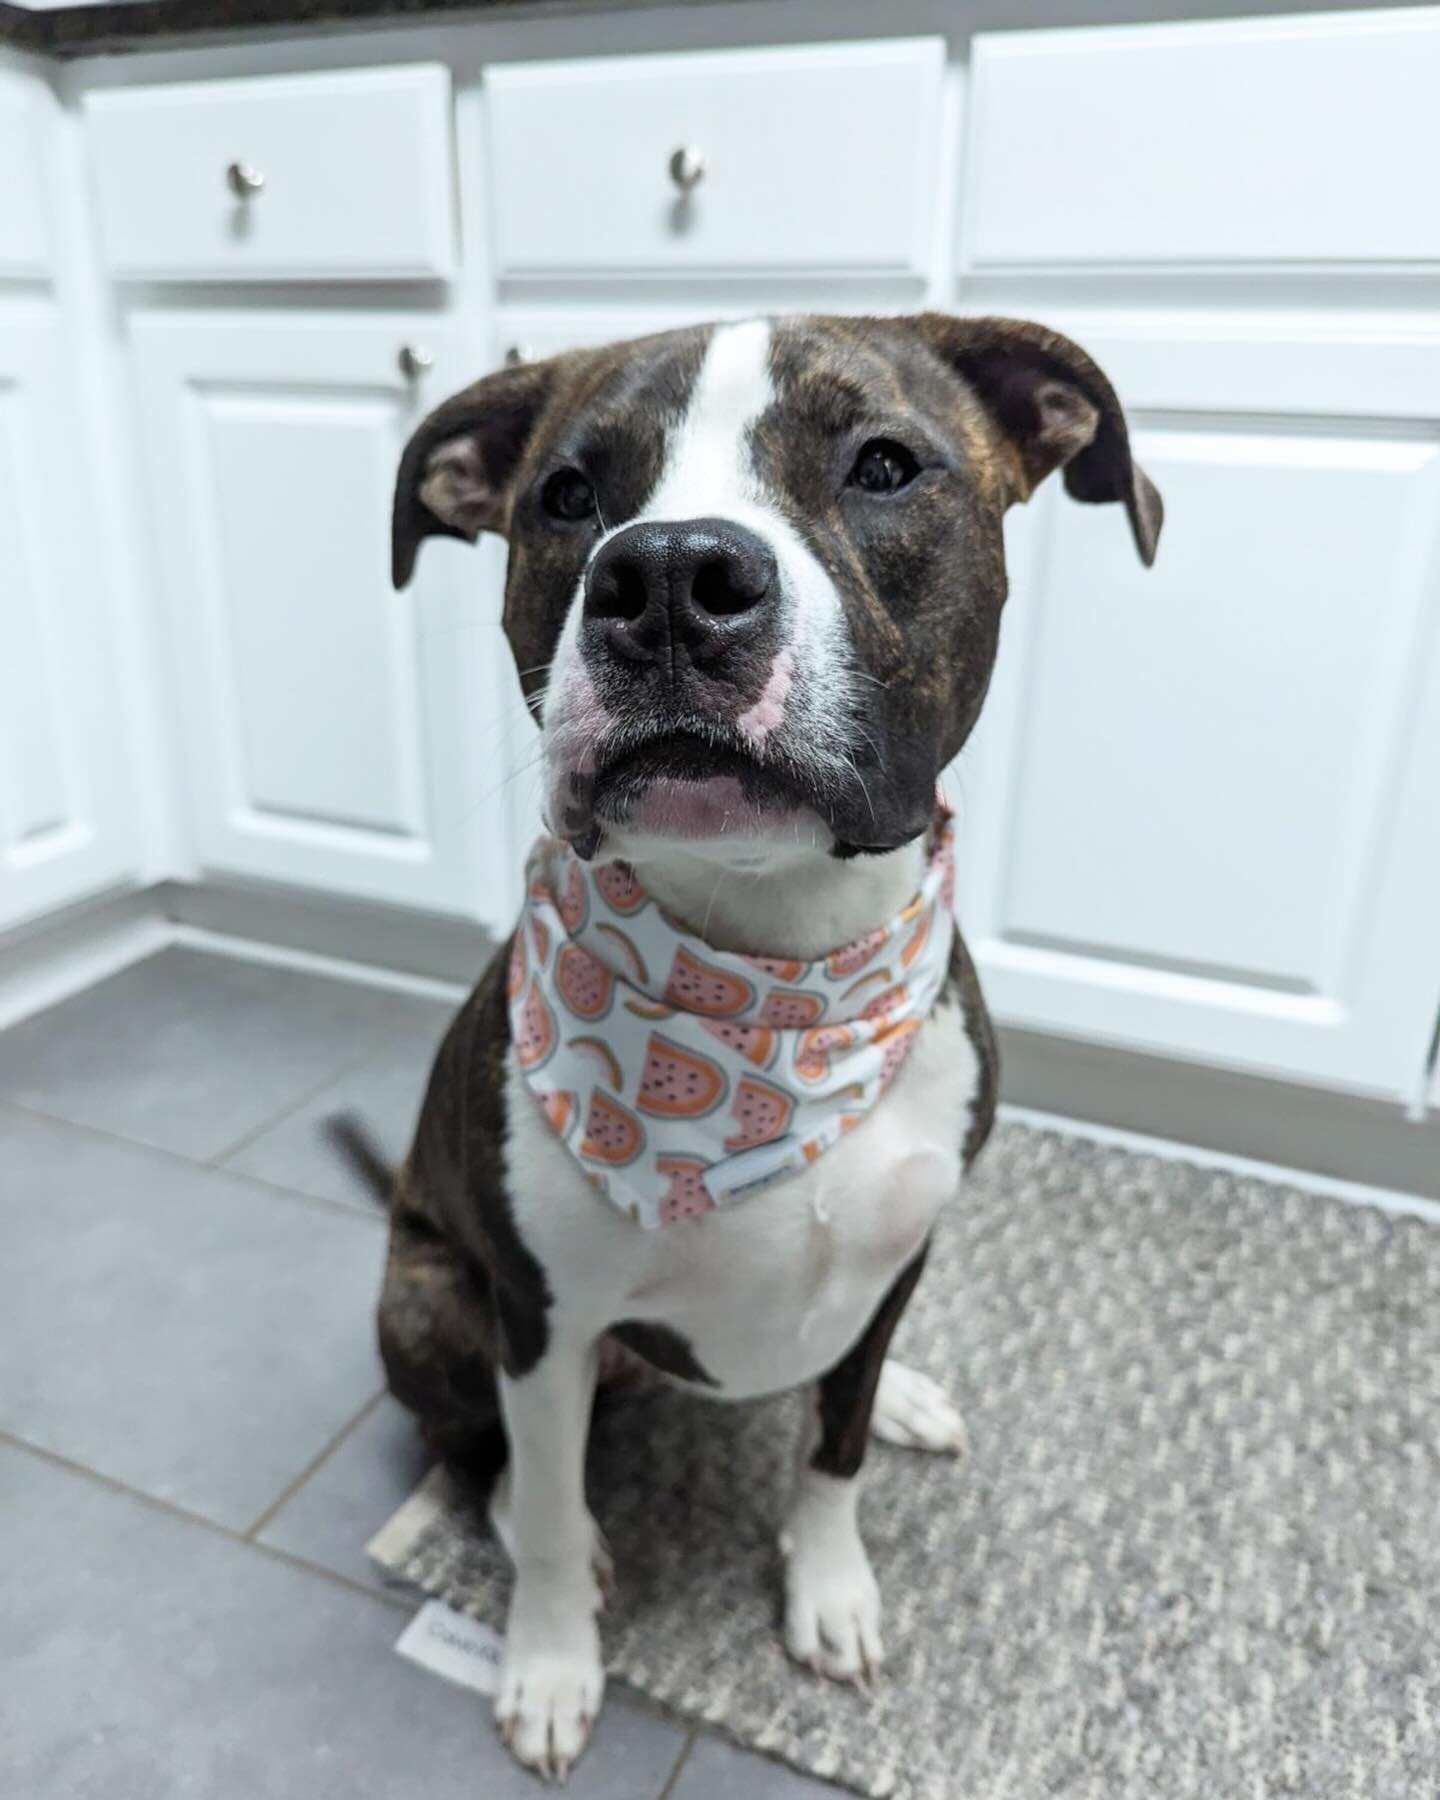 Just so you know, you are One In A Melon! 🍉 
What&rsquo;s your dog&rsquo;s favorite summer treat?

@whitneygirlsc is wearing a large One in a Melon bandana 🐶
.
.
.
.
.
#rescueddogsofinstagram #rescuepup #rescuedog #doggystyles #stylishdog #dogsinba